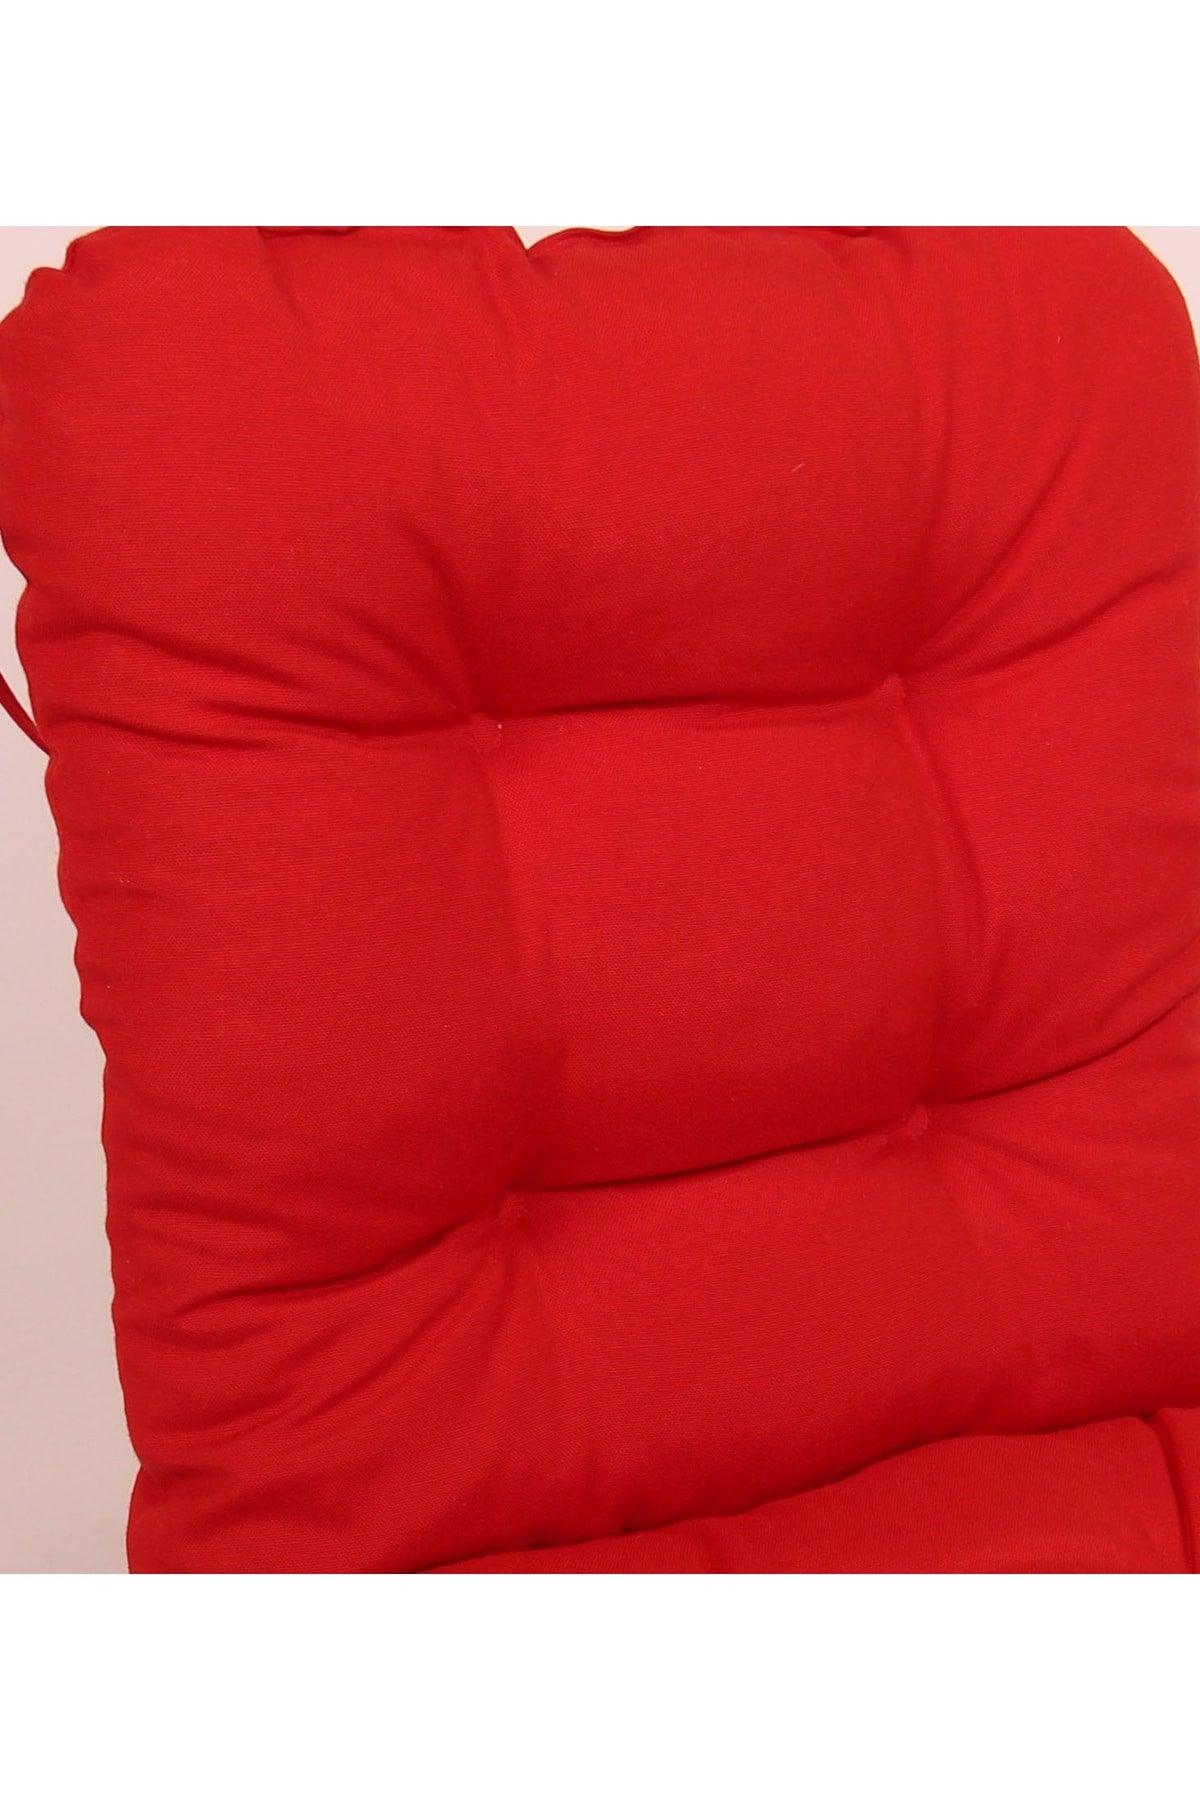 Neva Pofidik Red Backed Chair Cushion Specially Stitched Laced 44x94 Cm - Swordslife